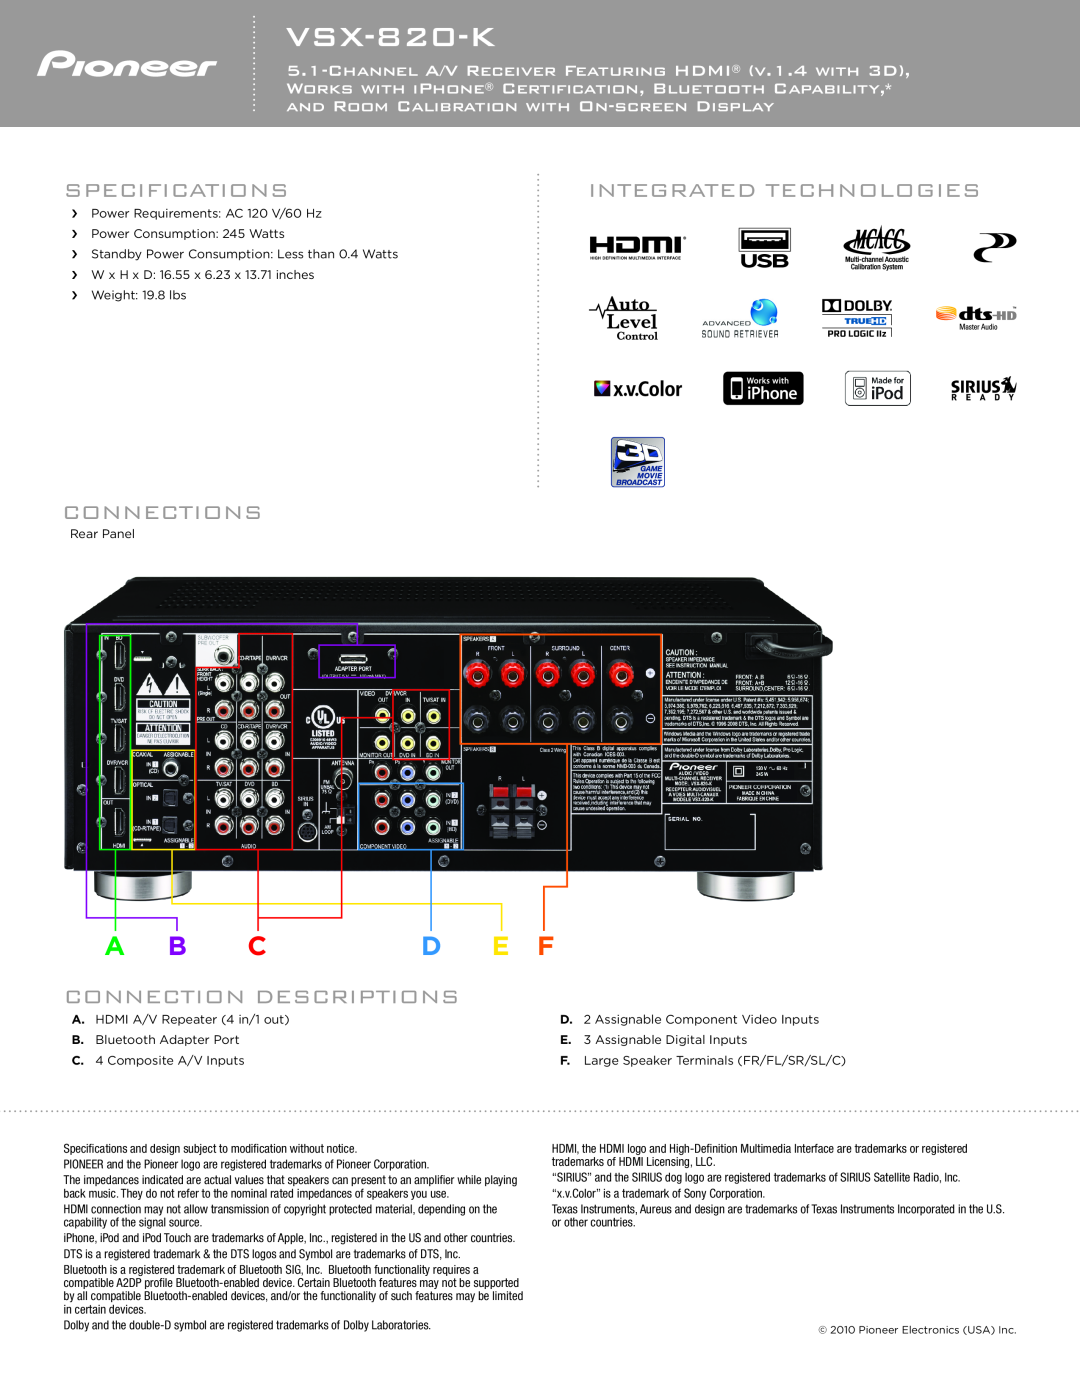 Pioneer VSX-820-K manual Specifications, Integrated Technologies, Connections, Connection Descriptions, A B C D E F 